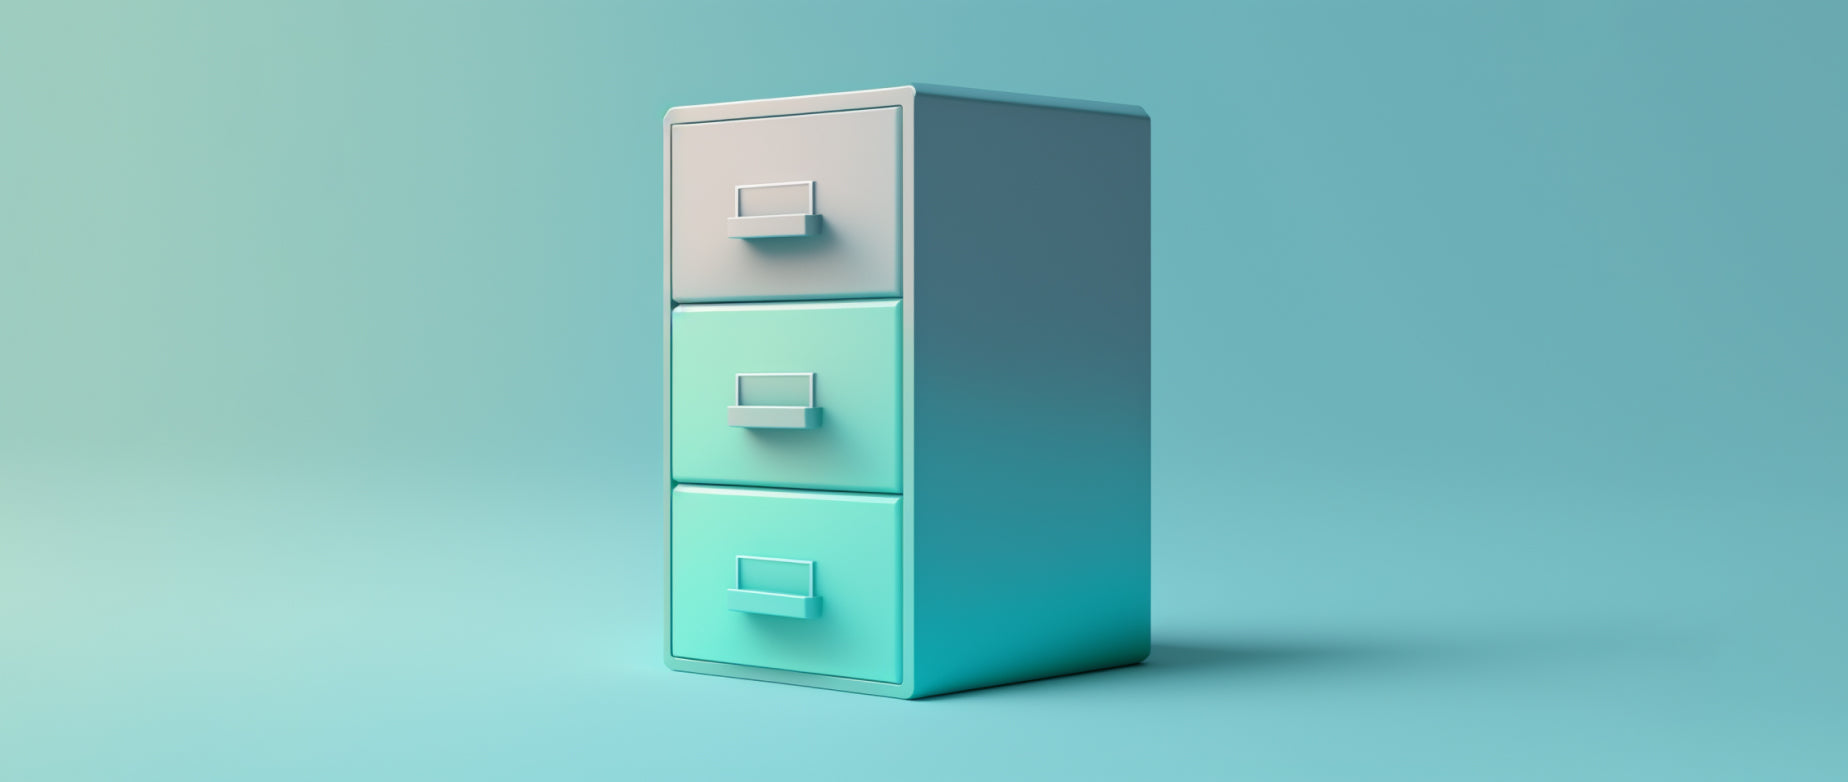 three stacked drawers against a teal background: operating model